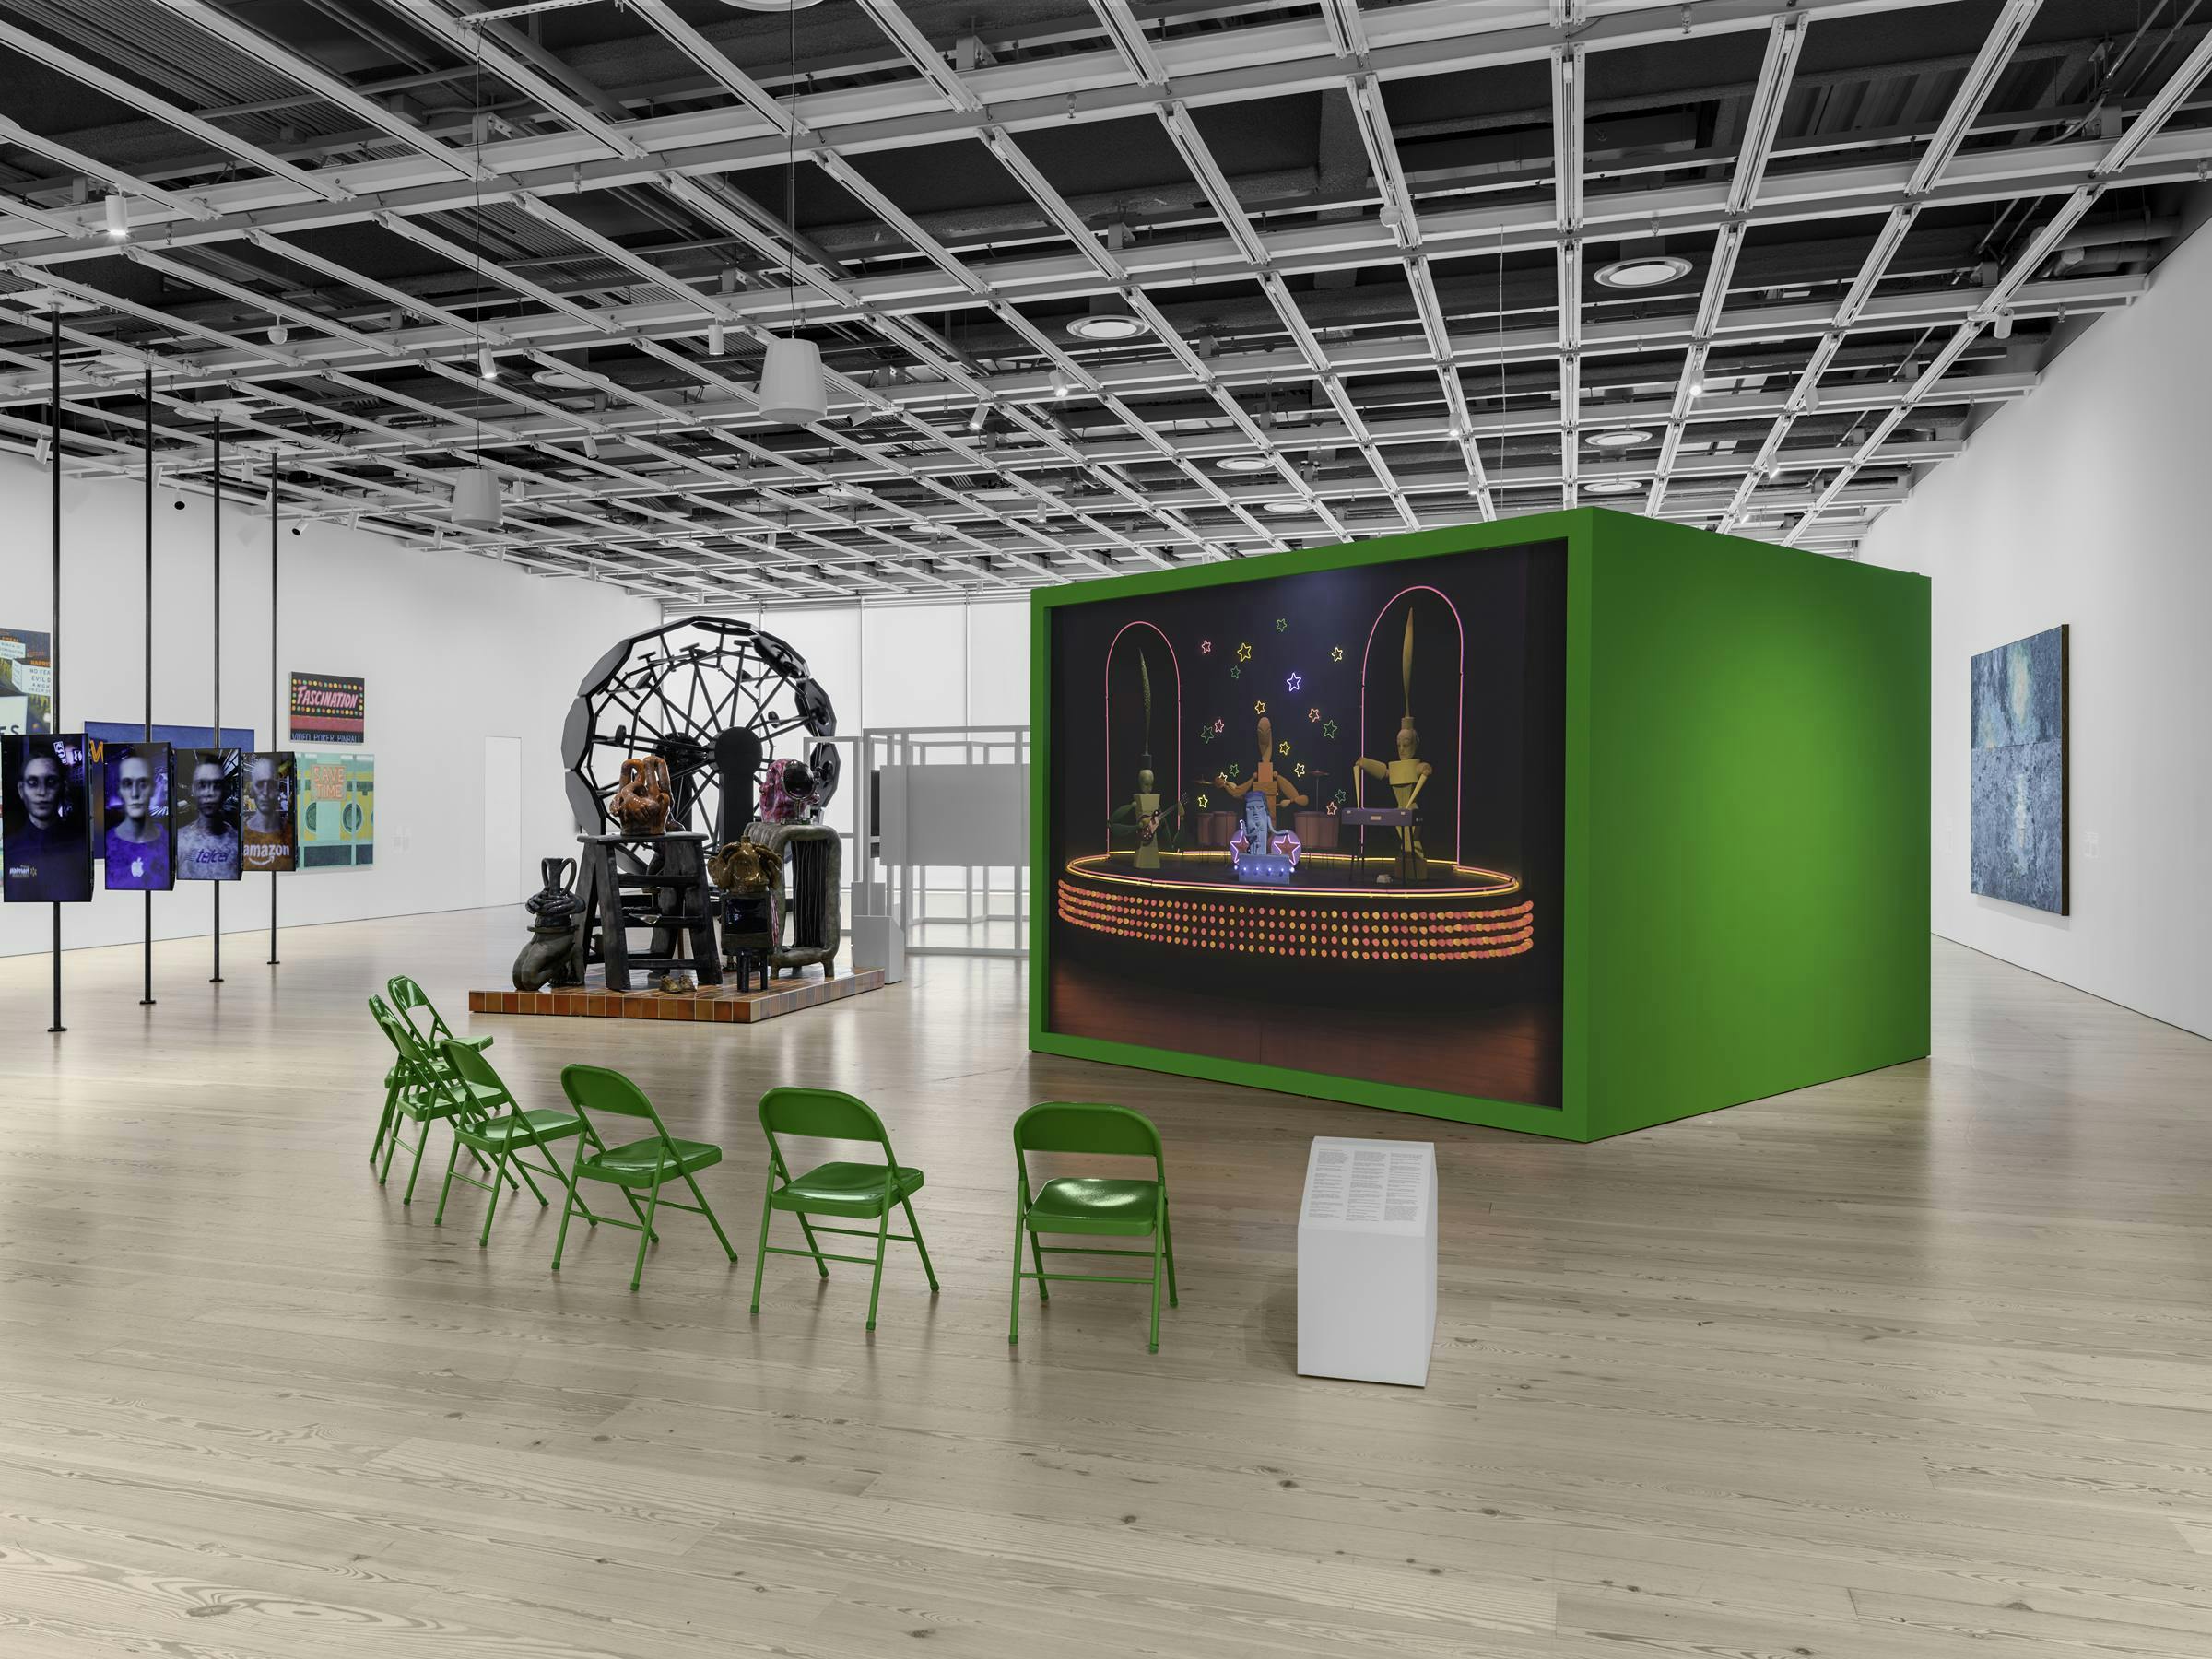 an art gallery with wooden floors and white walls. A video art work projected on to an green freestanding box. 8 green chairs are in front of the projection for the audience to sit on. 